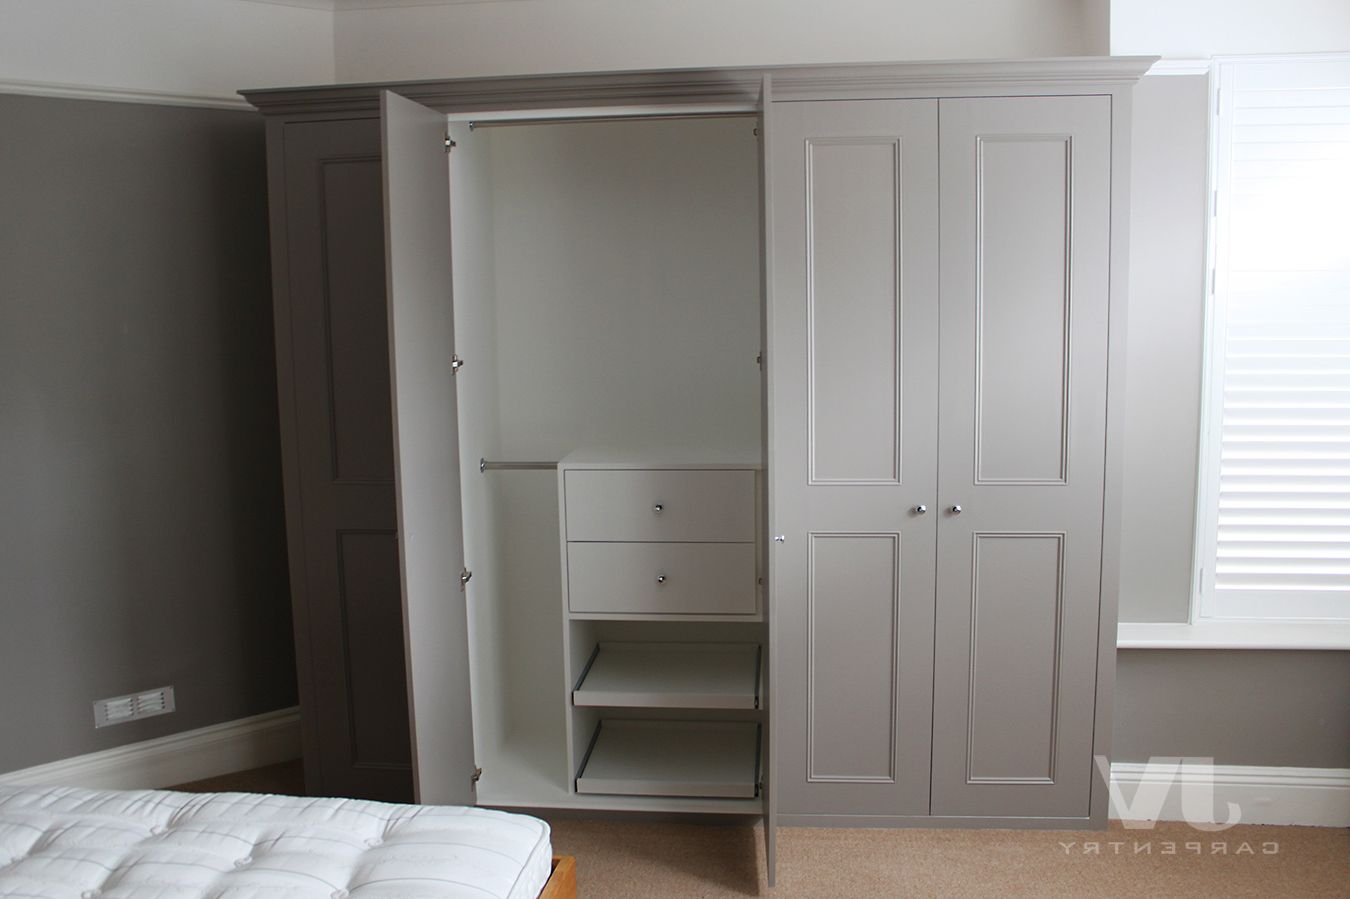 14 Grey Fitted Wardrobes Ideas For Your Bedroom | Jv Carpentry Intended For Bedroom Wardrobes (Gallery 20 of 20)